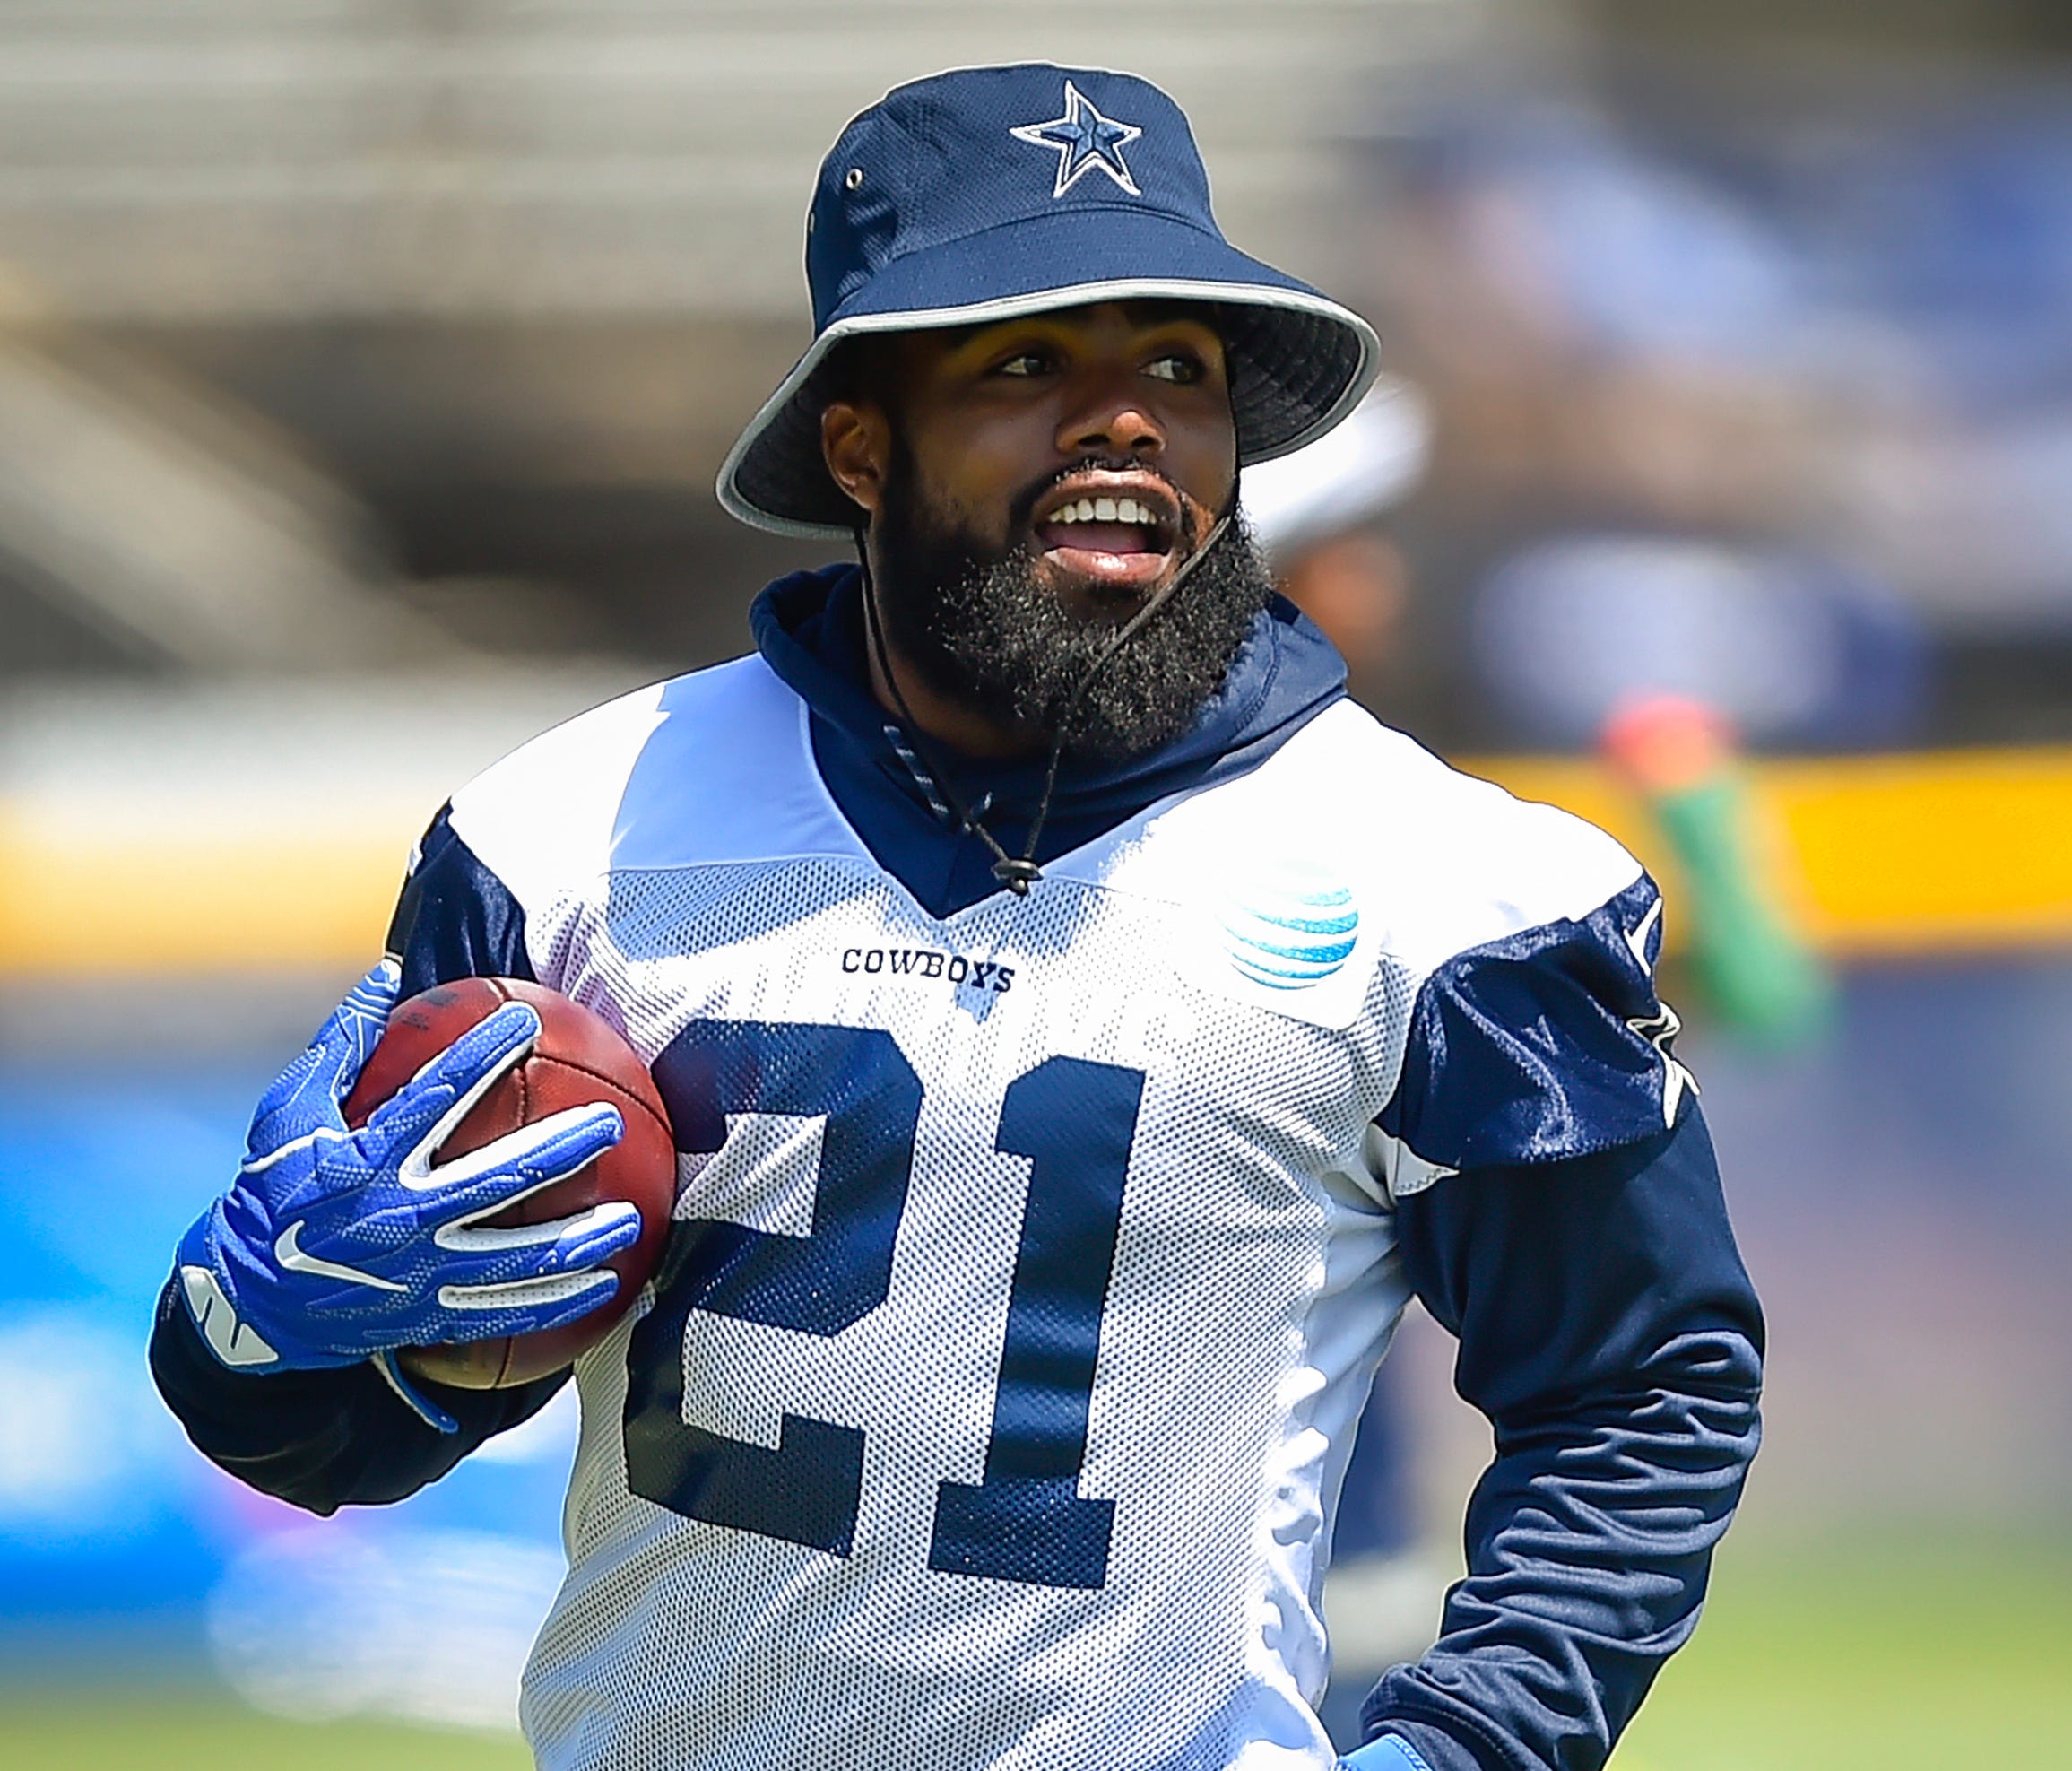 Cowboys owner Jerry Jones expects the NFL to make a decision soon in its Ezekiel Elliott investigation.